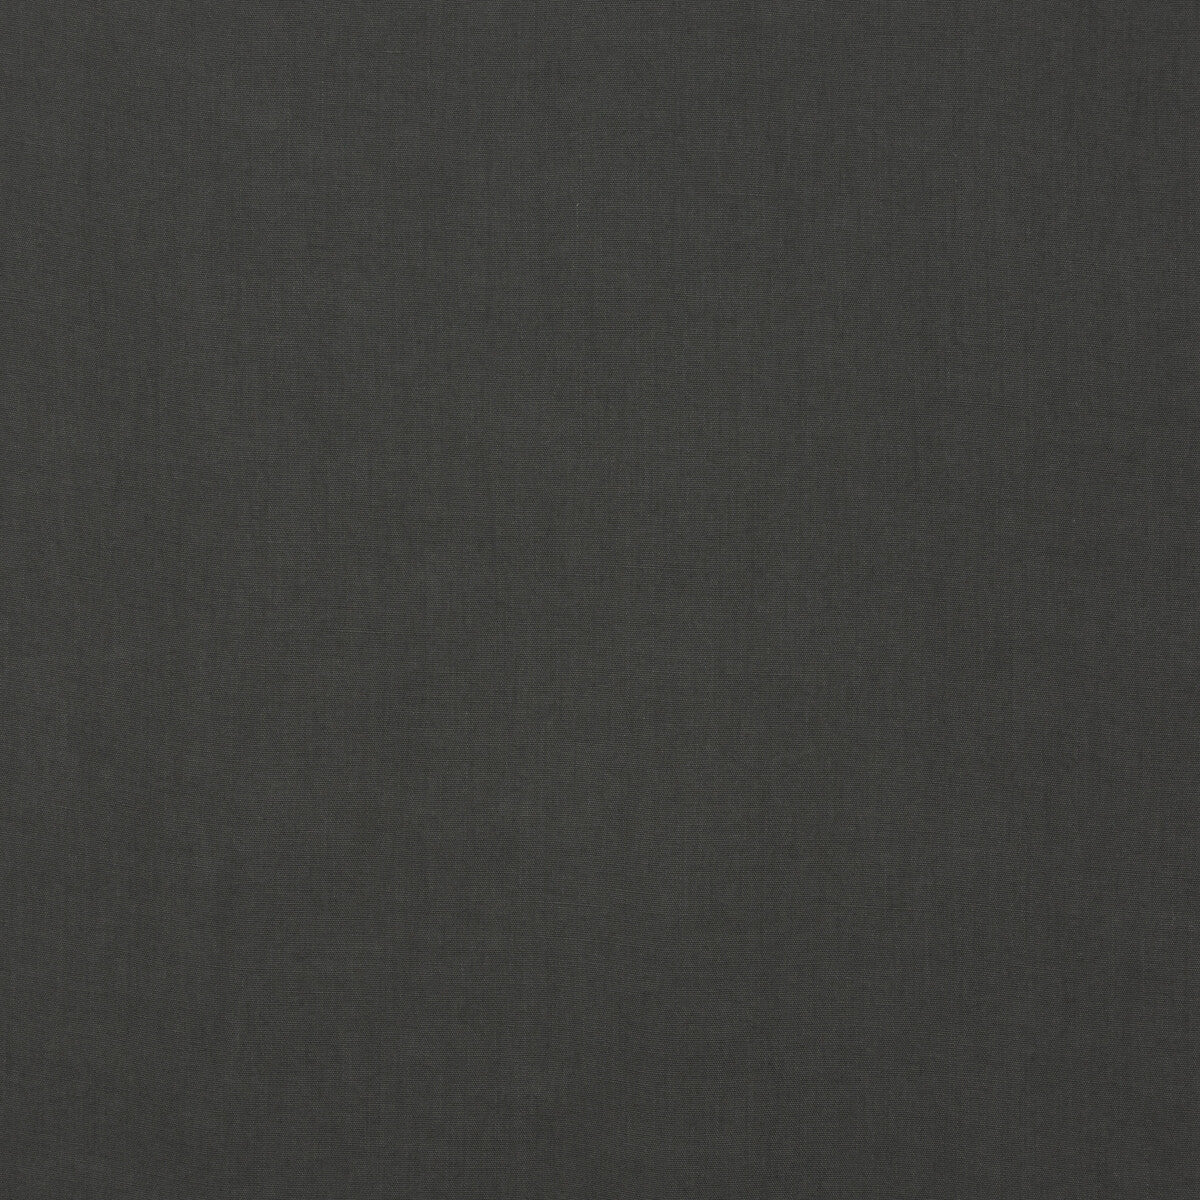 Meridian Linen fabric in graphite color - pattern ED85281.970.0 - by Threads in the Meridian collection